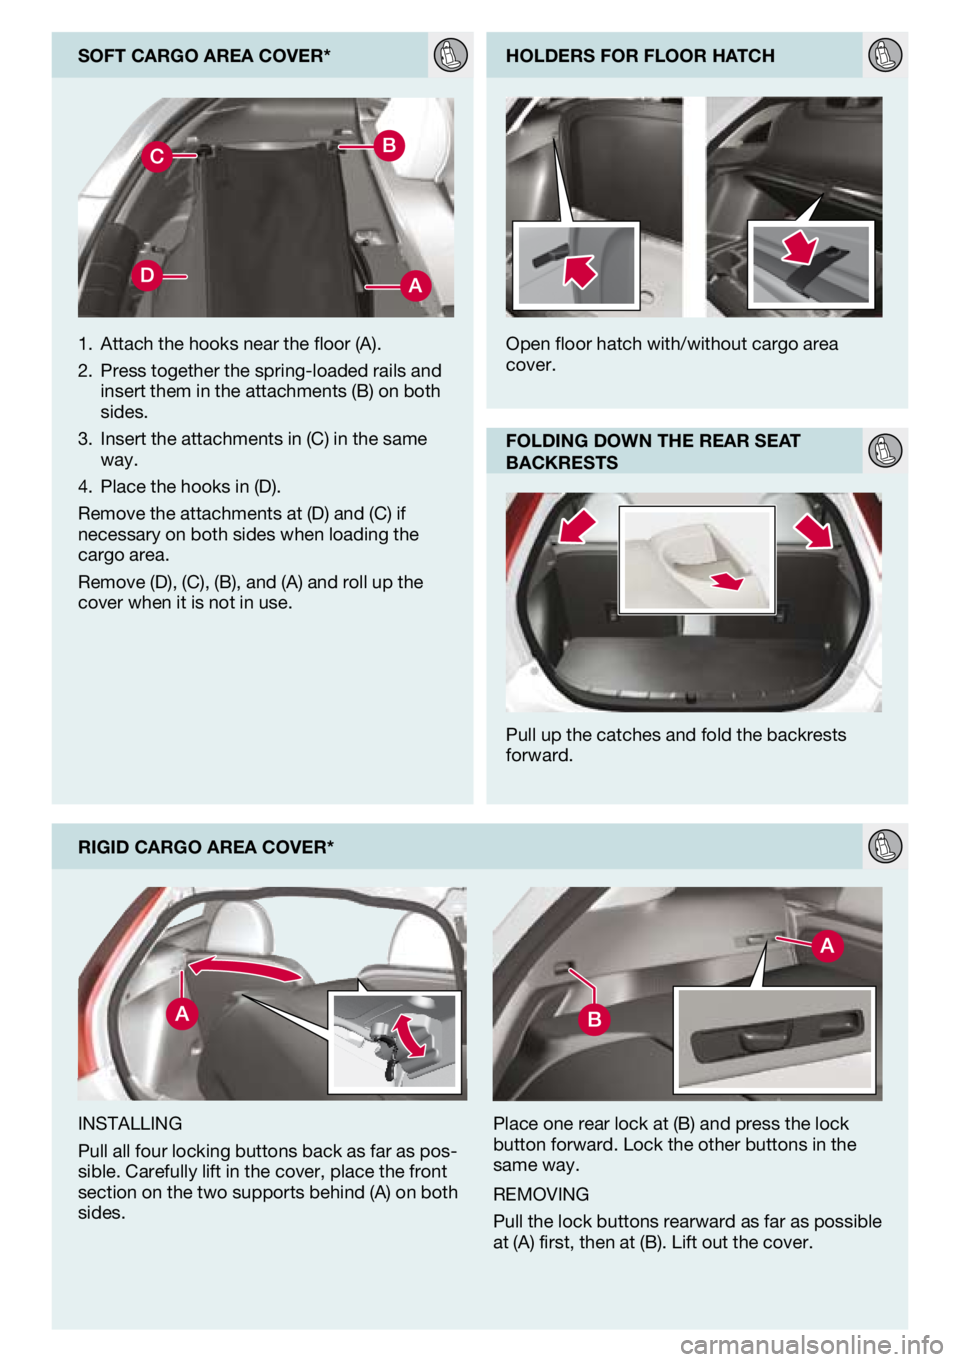 VOLVO C30 2011  Quick Guide 
soFt cargo area cover*
rIgId cargo area cover*
iNsTalliNg
Pull all four locking buttons back as far as pos-sible. Carefully lift in the cover, place the front 
section on the two supports behind (a) 